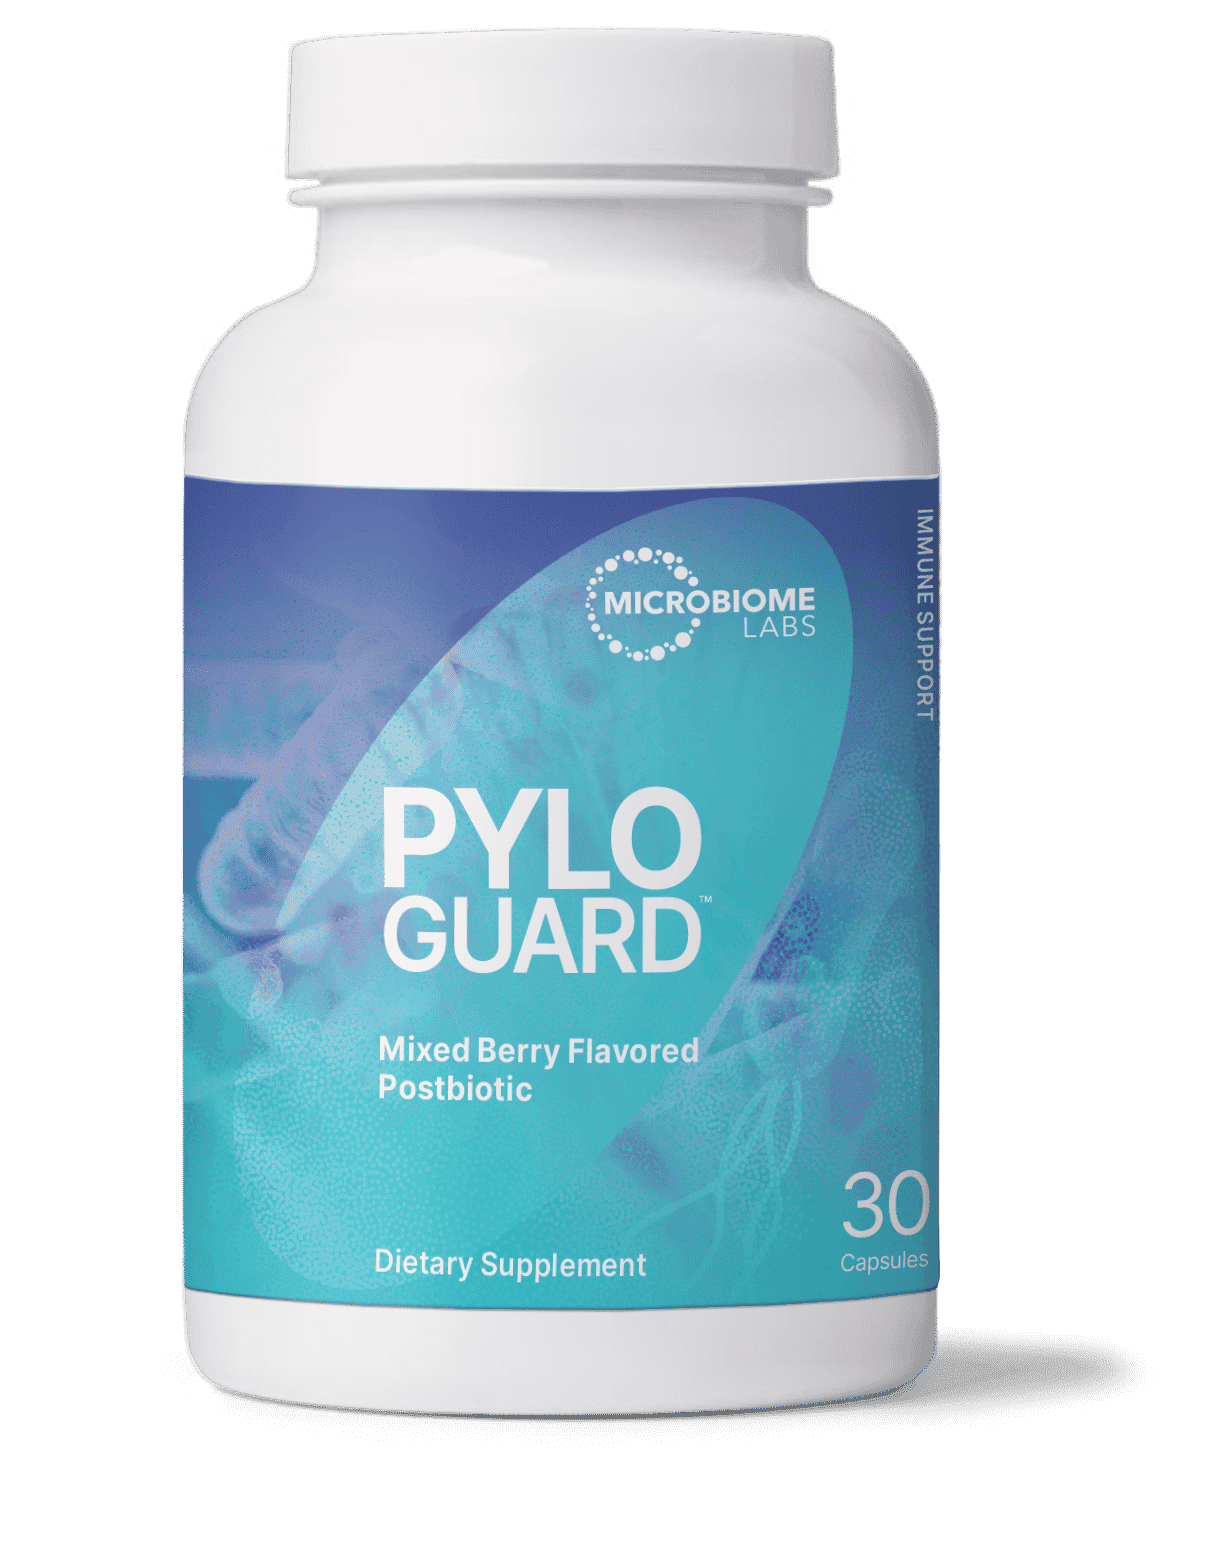 pyloguard is a supplement for h pylori infection and GERD